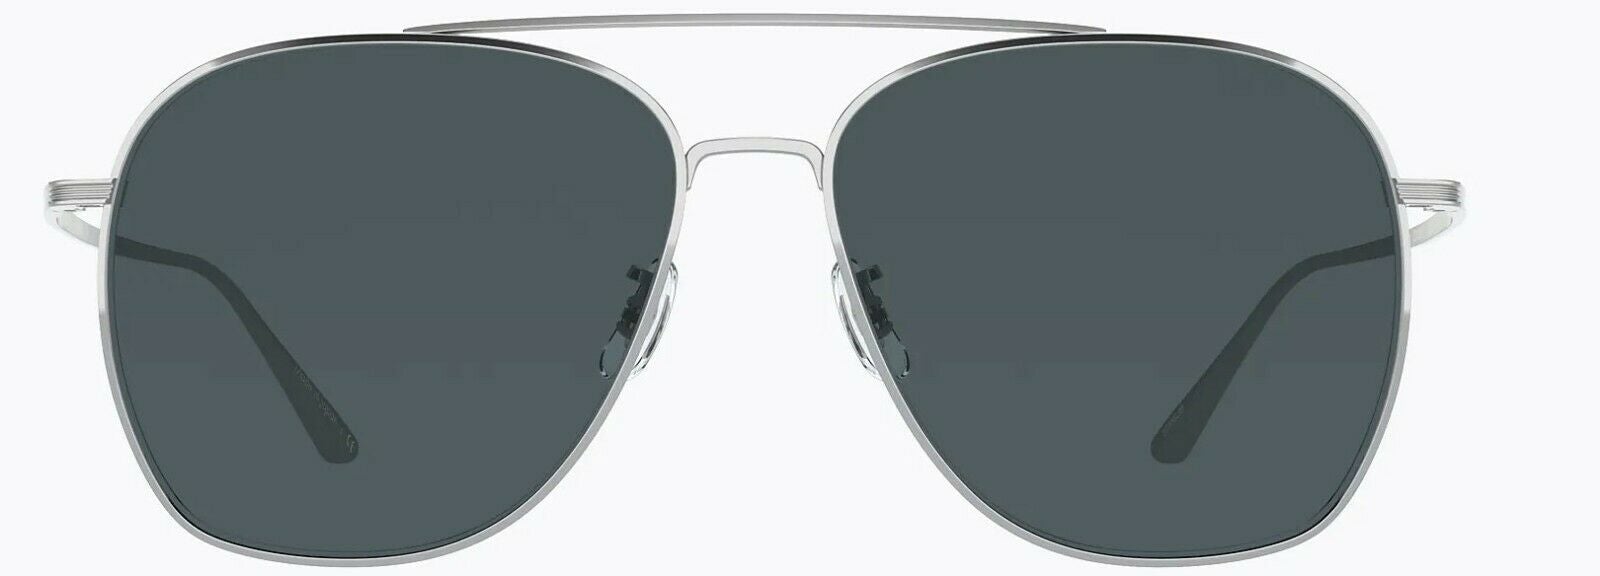 Oliver Peoples Sunglasses 1278ST 5036R5 The Row Ellerston Silver / Blue 58mm-827934450936-classypw.com-2